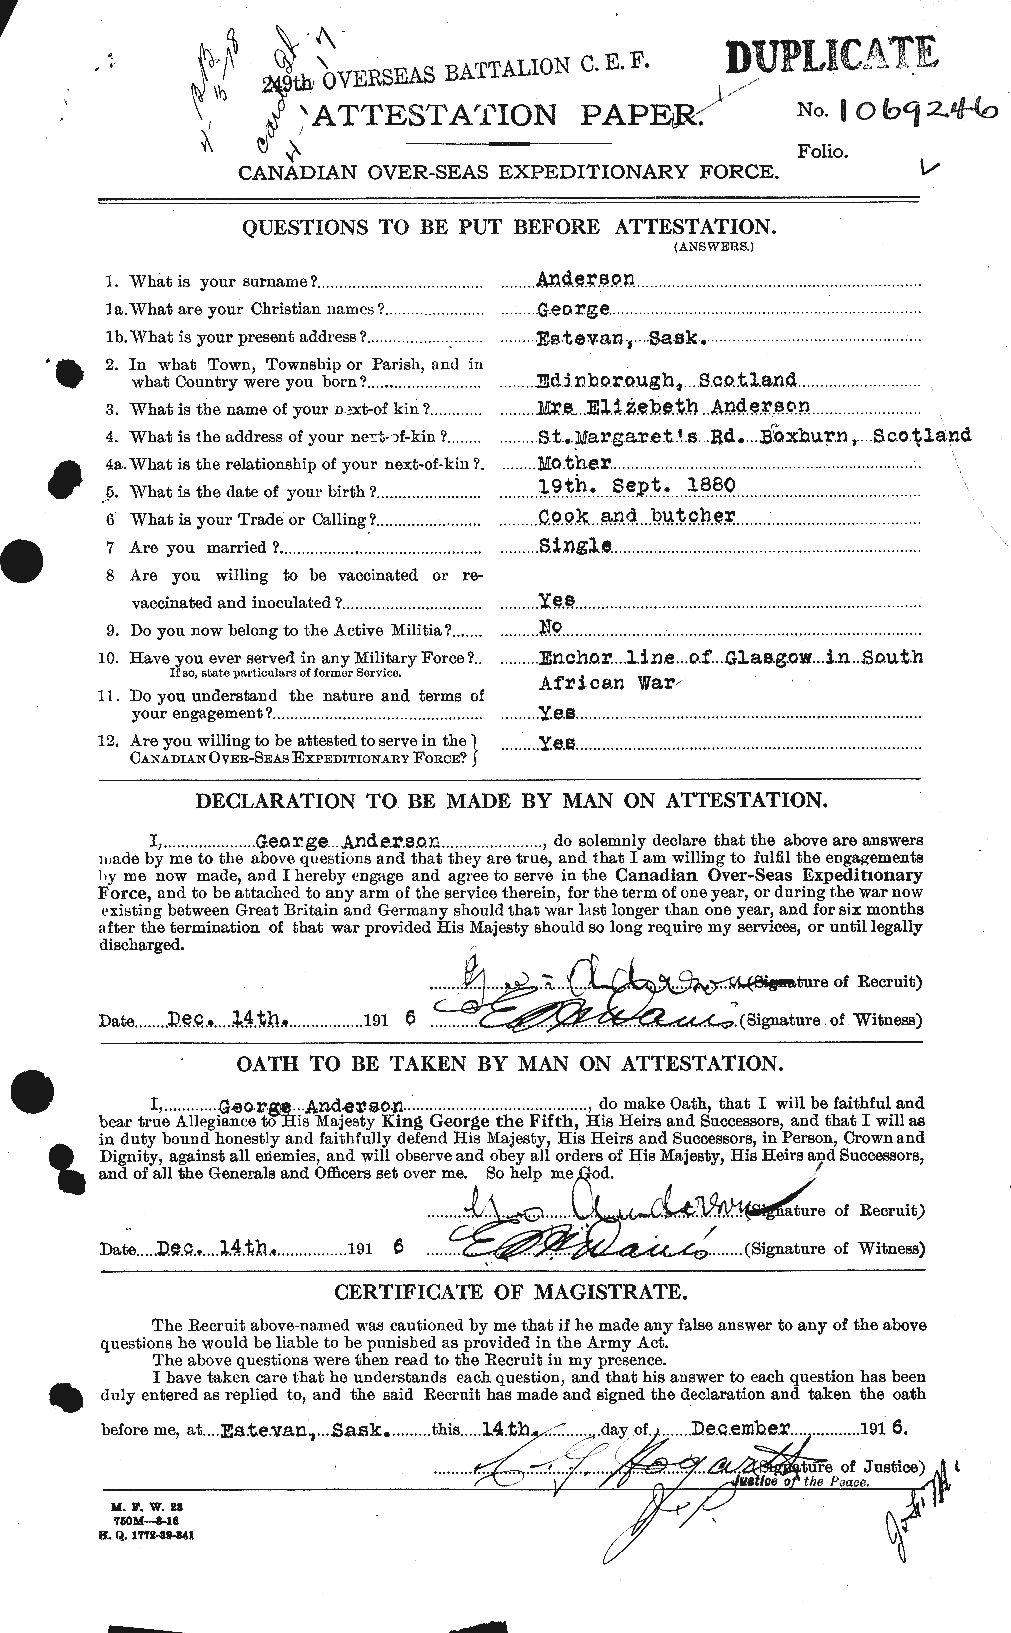 Personnel Records of the First World War - CEF 209774a